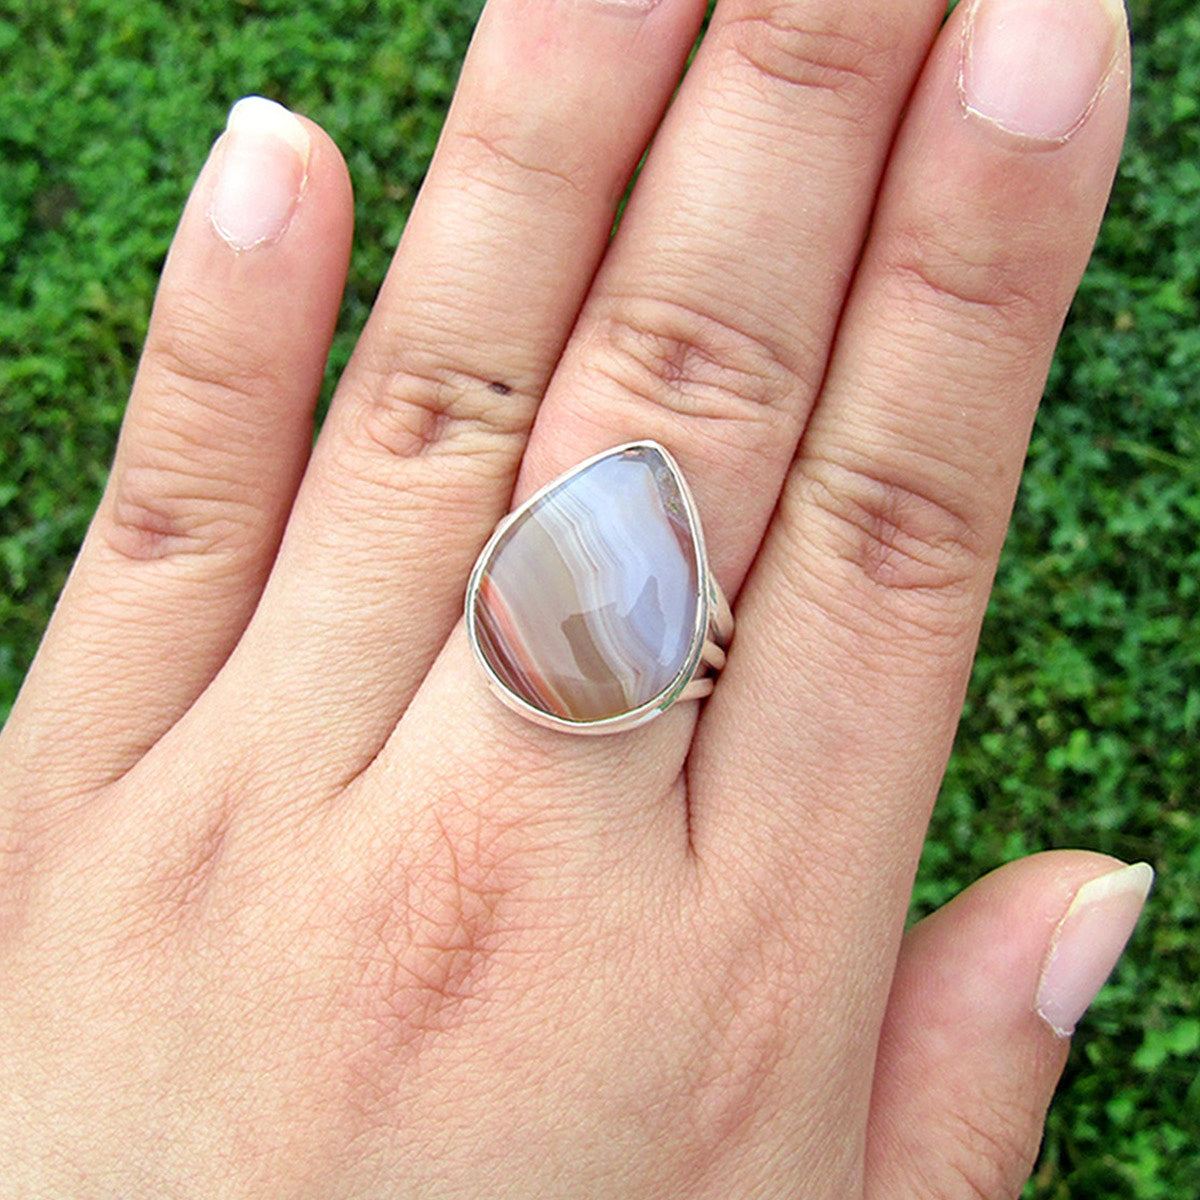 Botswana Agate Teardrop Classic Sterling Silver Ring US 7.5 SS-006